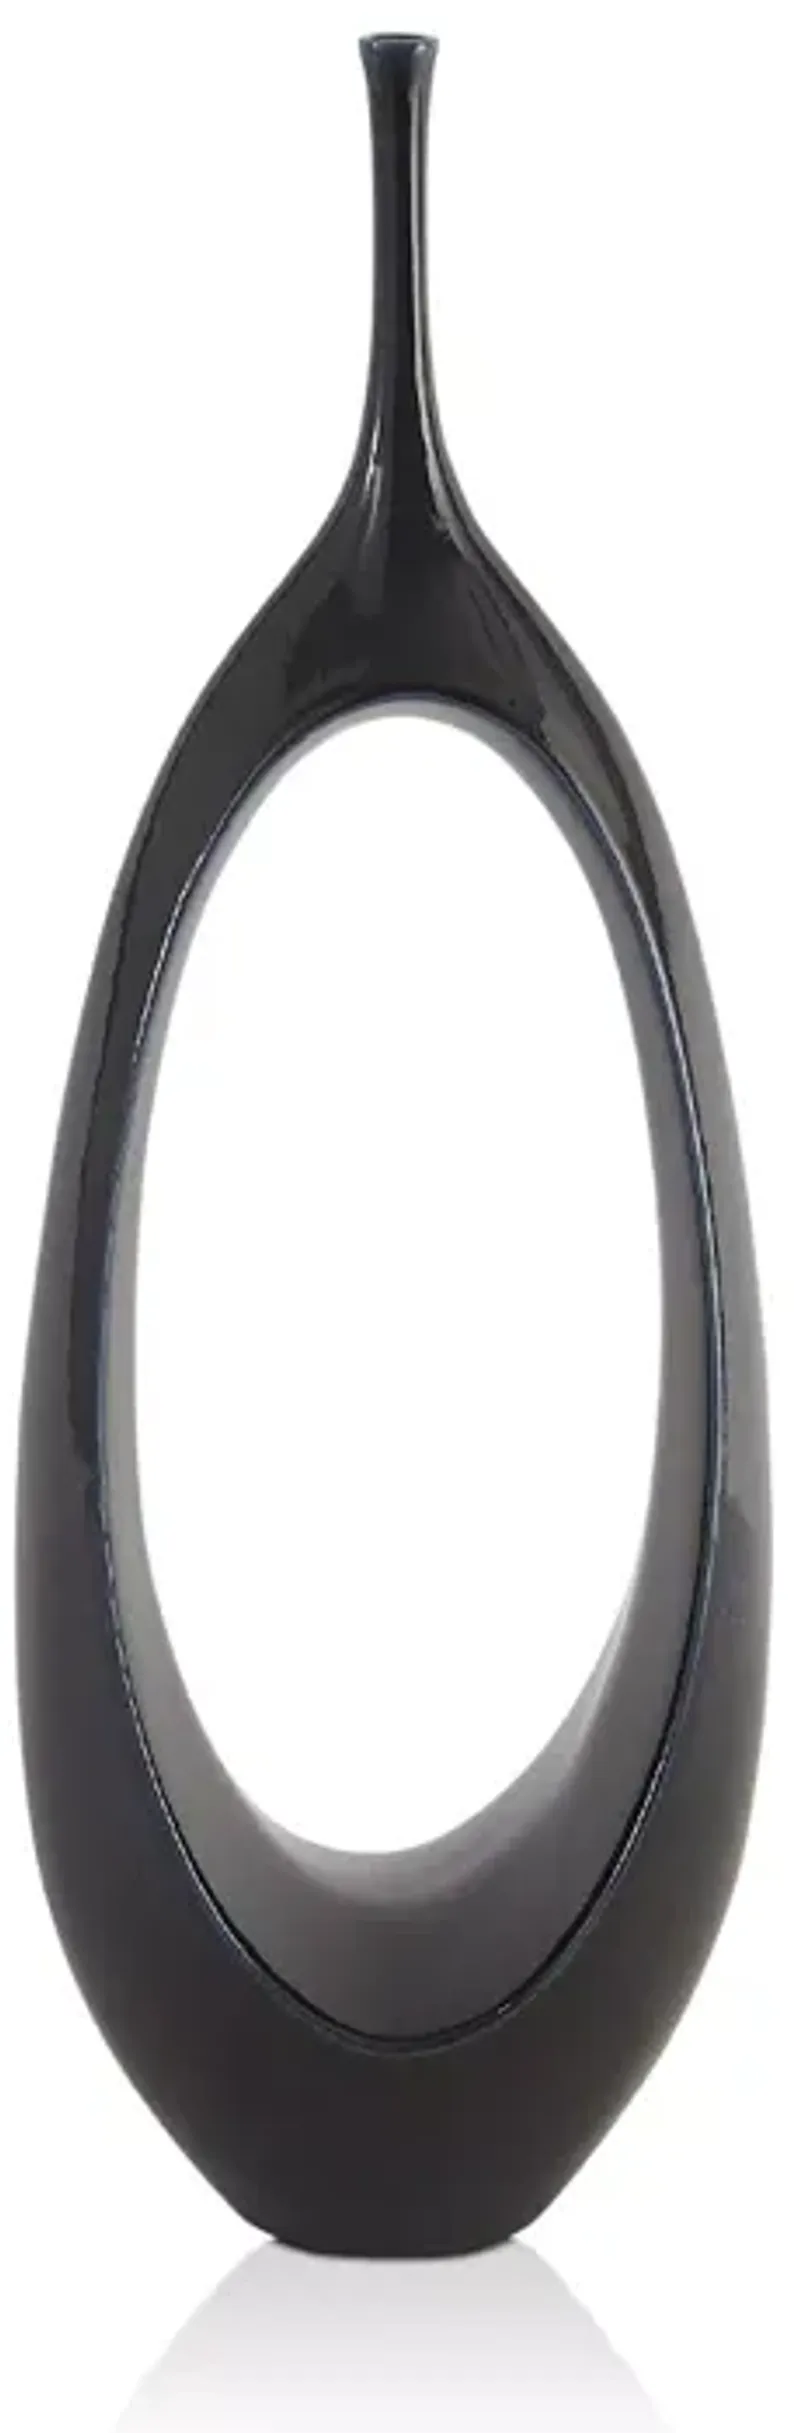 Global Views Open Oval Ring Vase, Small